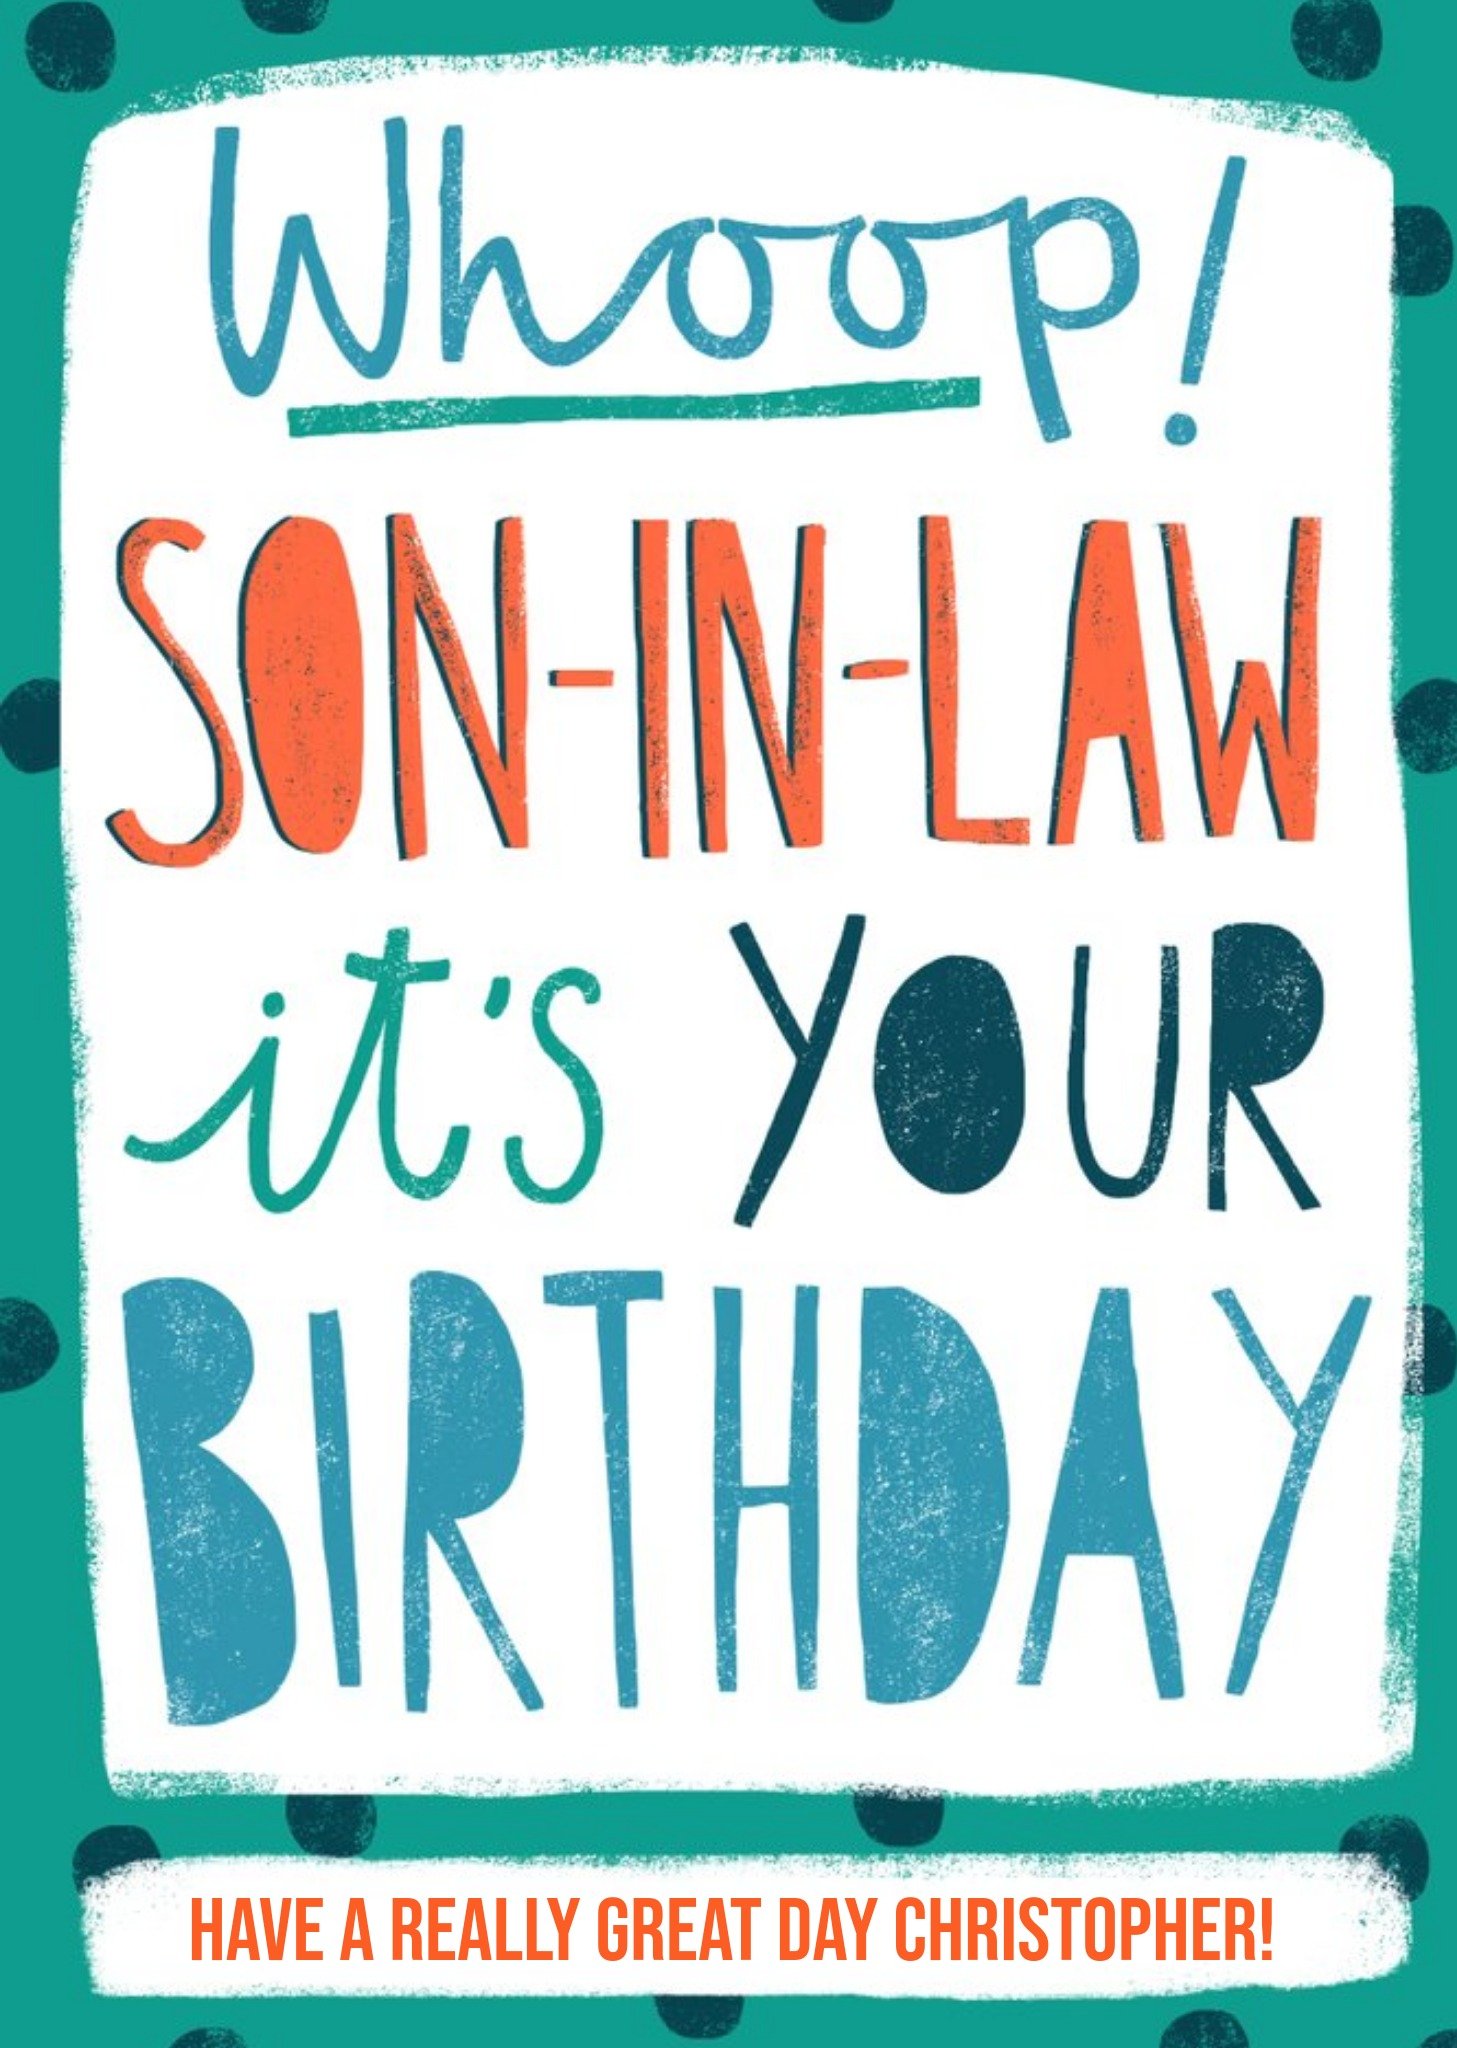 Moonpig Whoop Son-In-Law It's Your Birthday - Birthday Card, Large